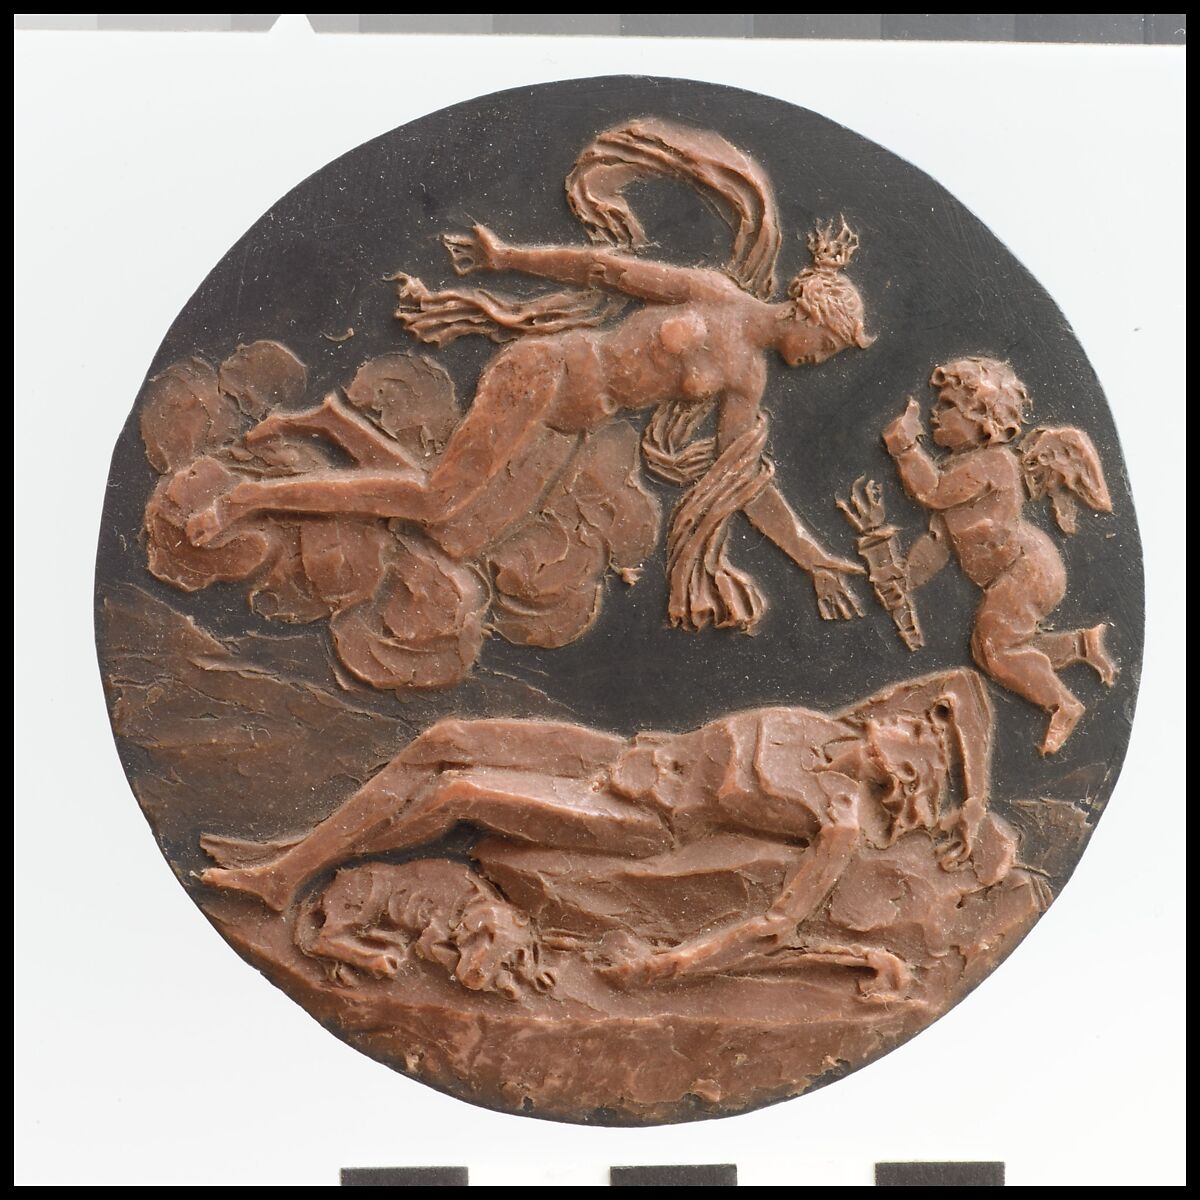 Diana and Endymion, Jacques-Edmé Dumont (Paris 1761–1844), Wax on slate, French 